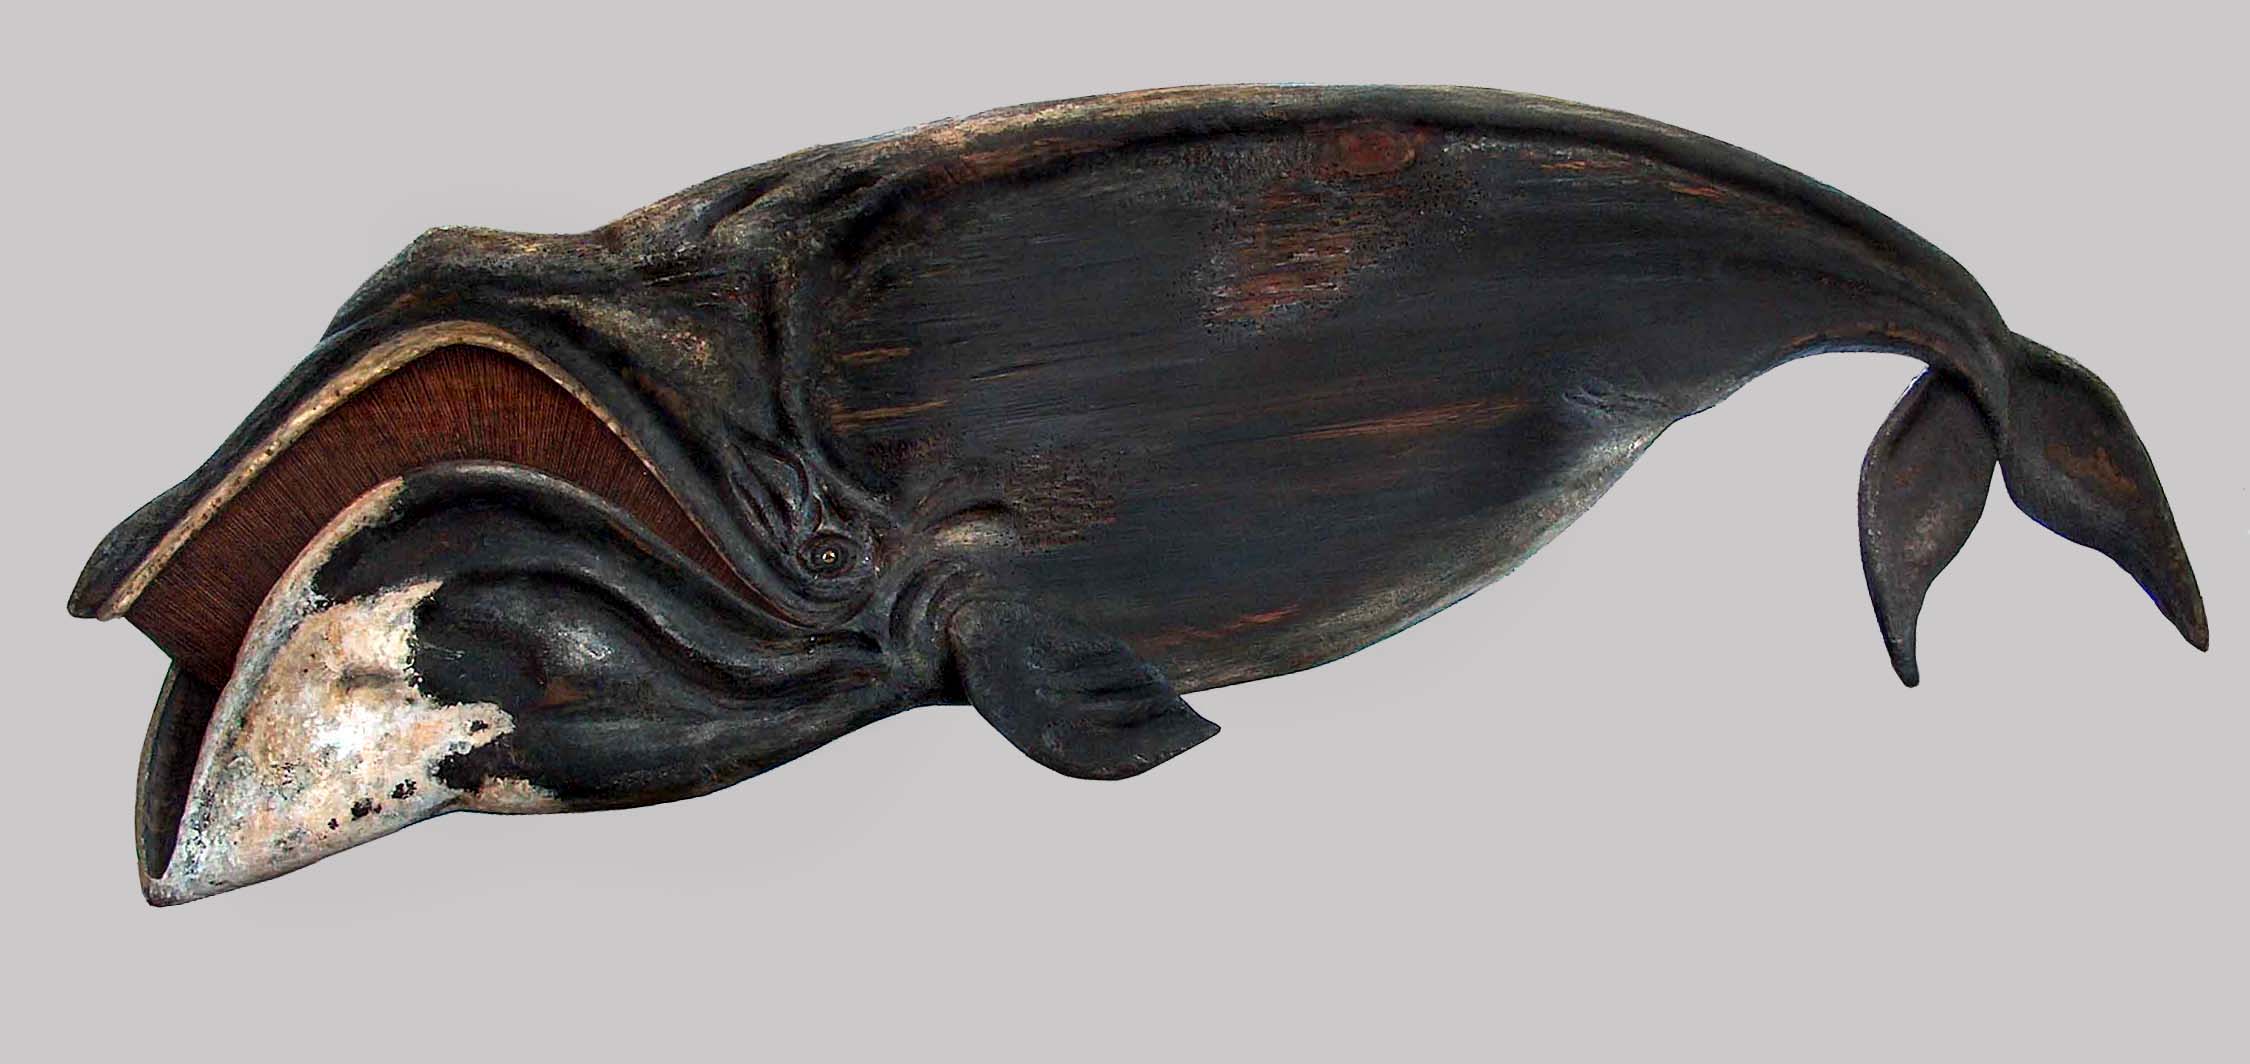 The mouth of the Bowhead Whale is looks like it's upside down